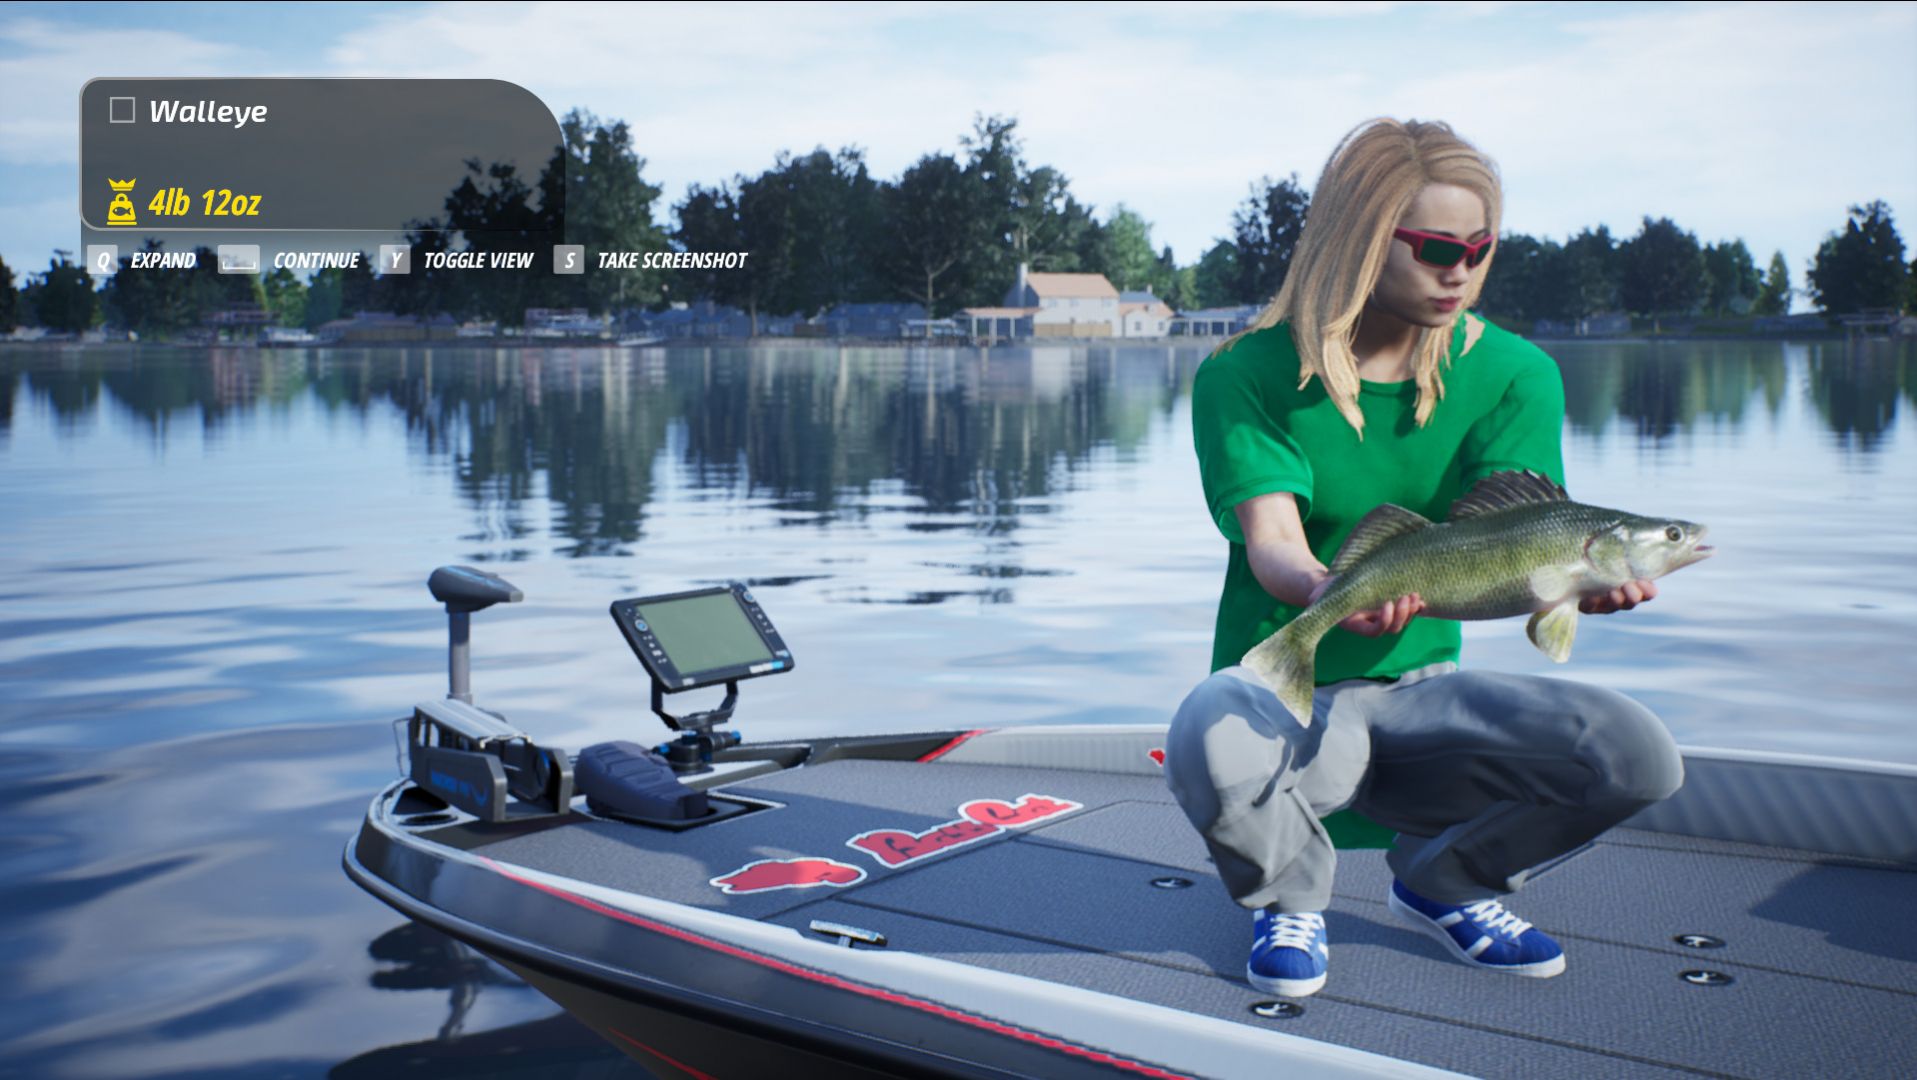 Co-Optimus - Bassmaster - Is Co-Op Game Fishing News 2022 Practically Fishing a